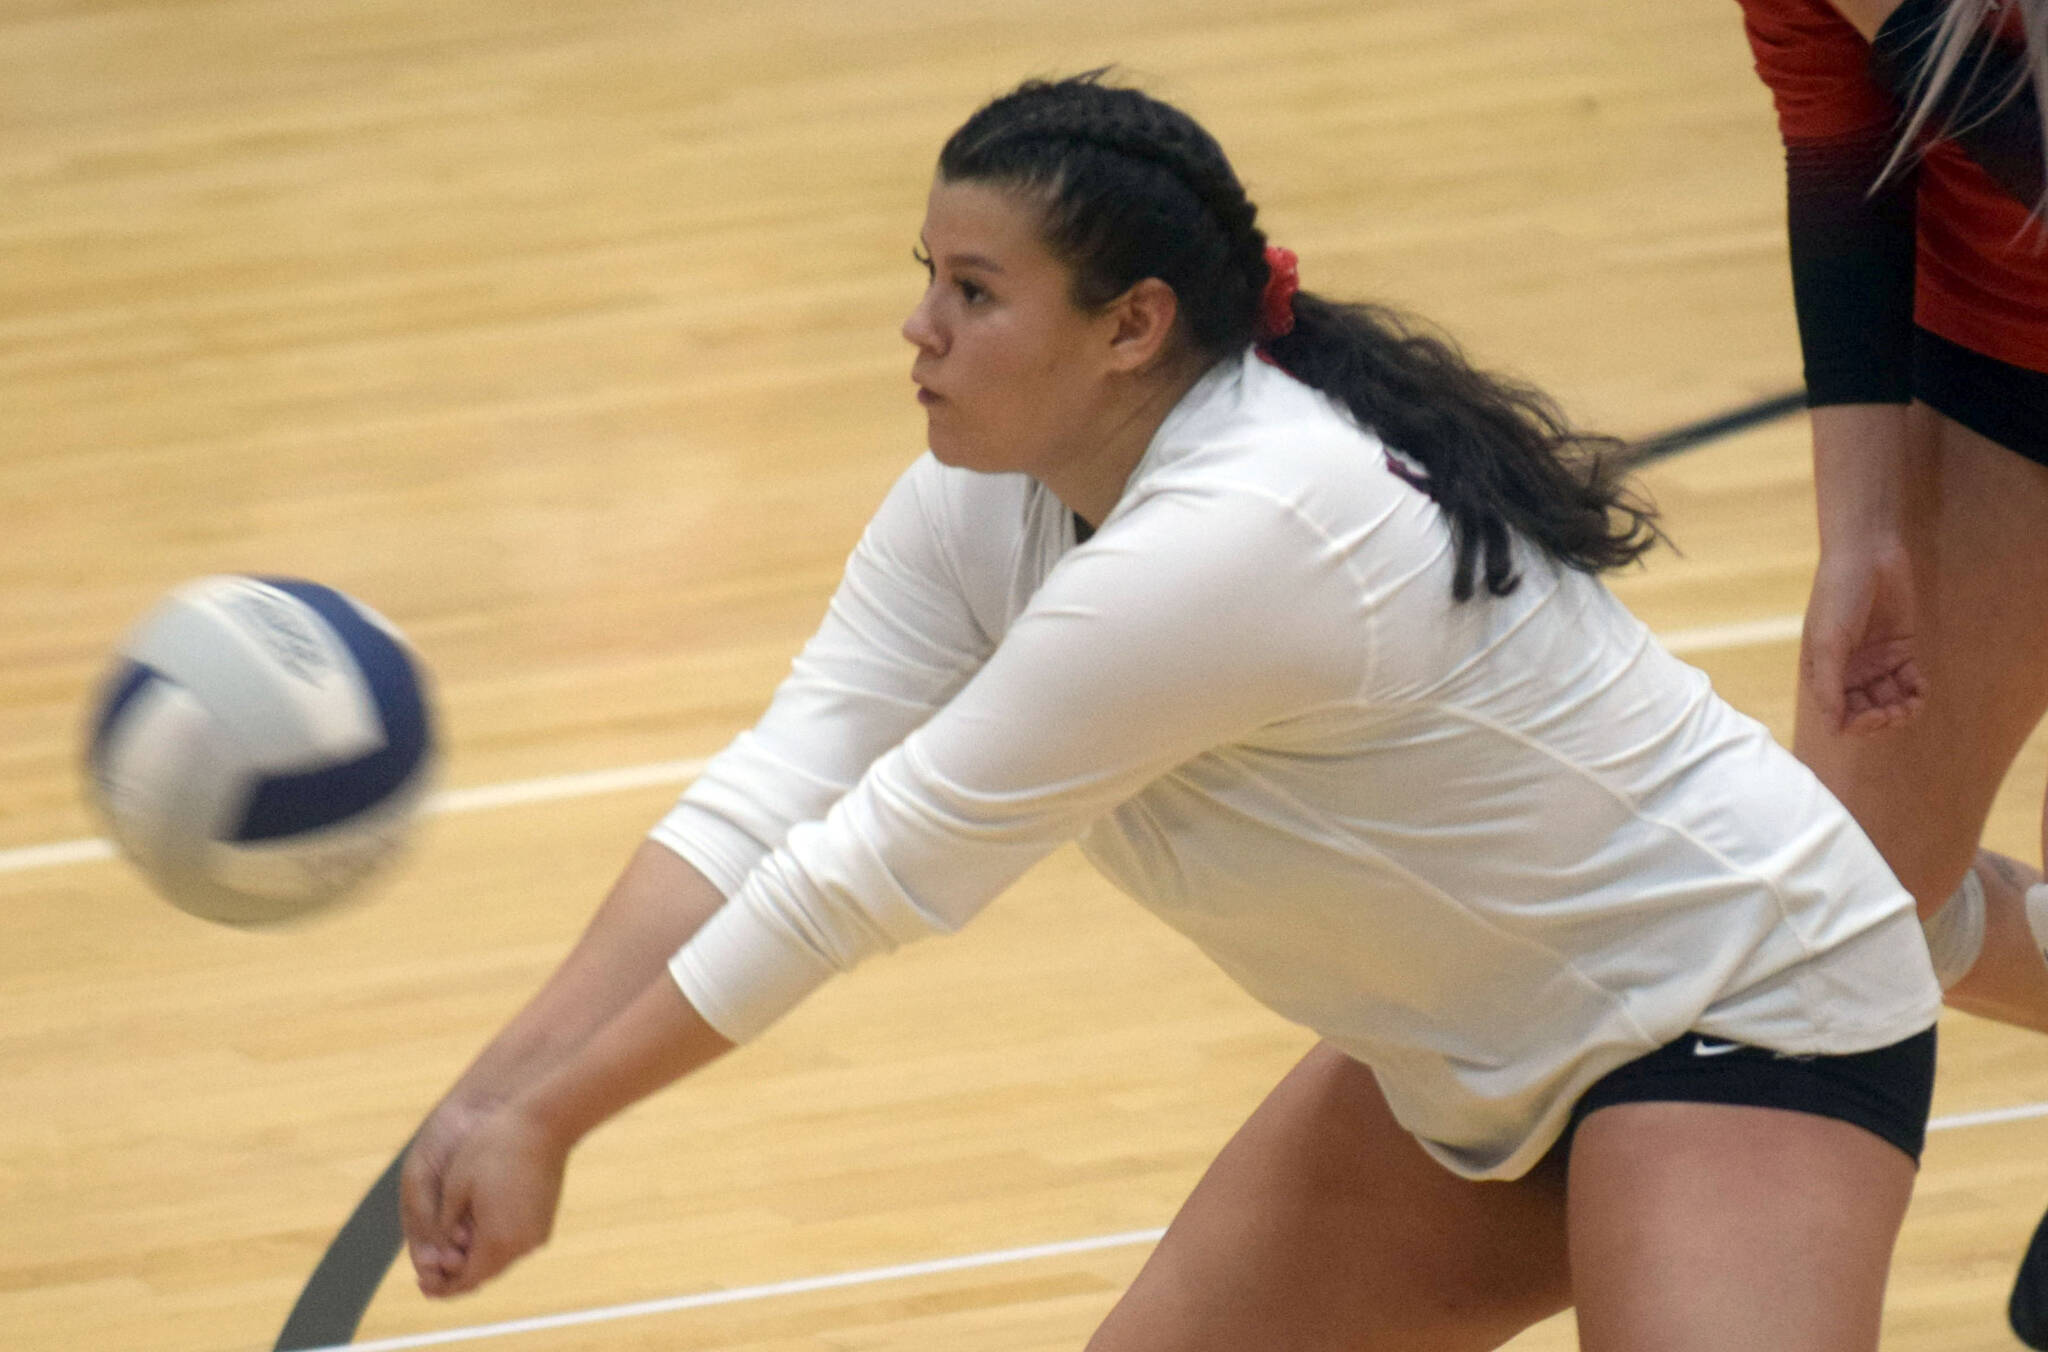 Kenai’s Valerie Villegas receives a serve during the team’s volleyball game against the Soldotna Stars on Thursday, Sept. 23, 2021, in Soldotna, Alaska. (Camille Botello/Peninsula Clarion)